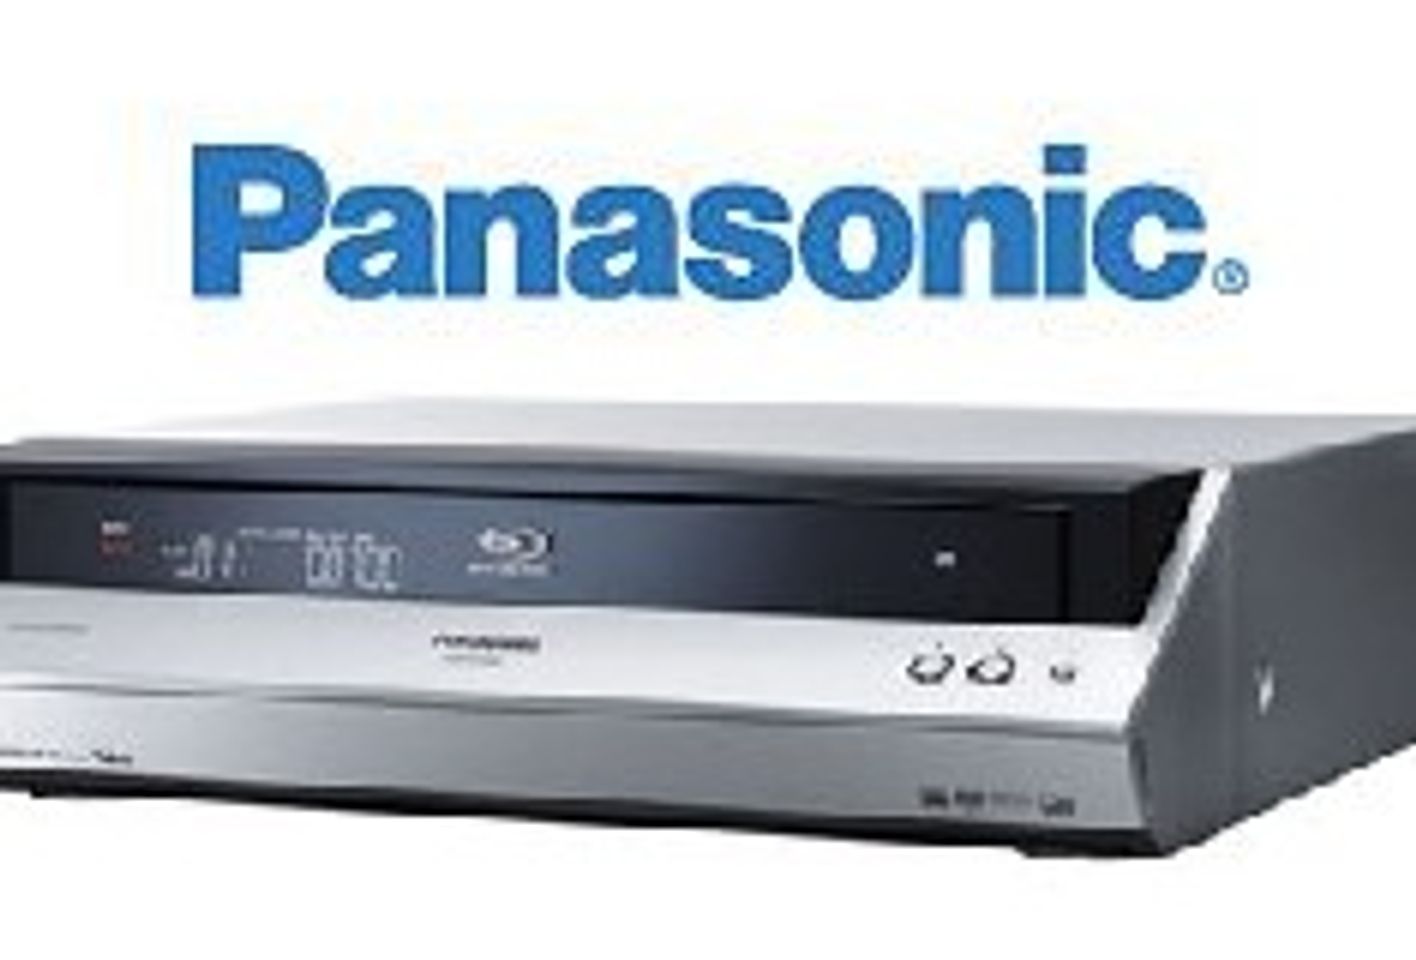 Panasonic Says Tech Center Means Blu-Ray the DVD Future